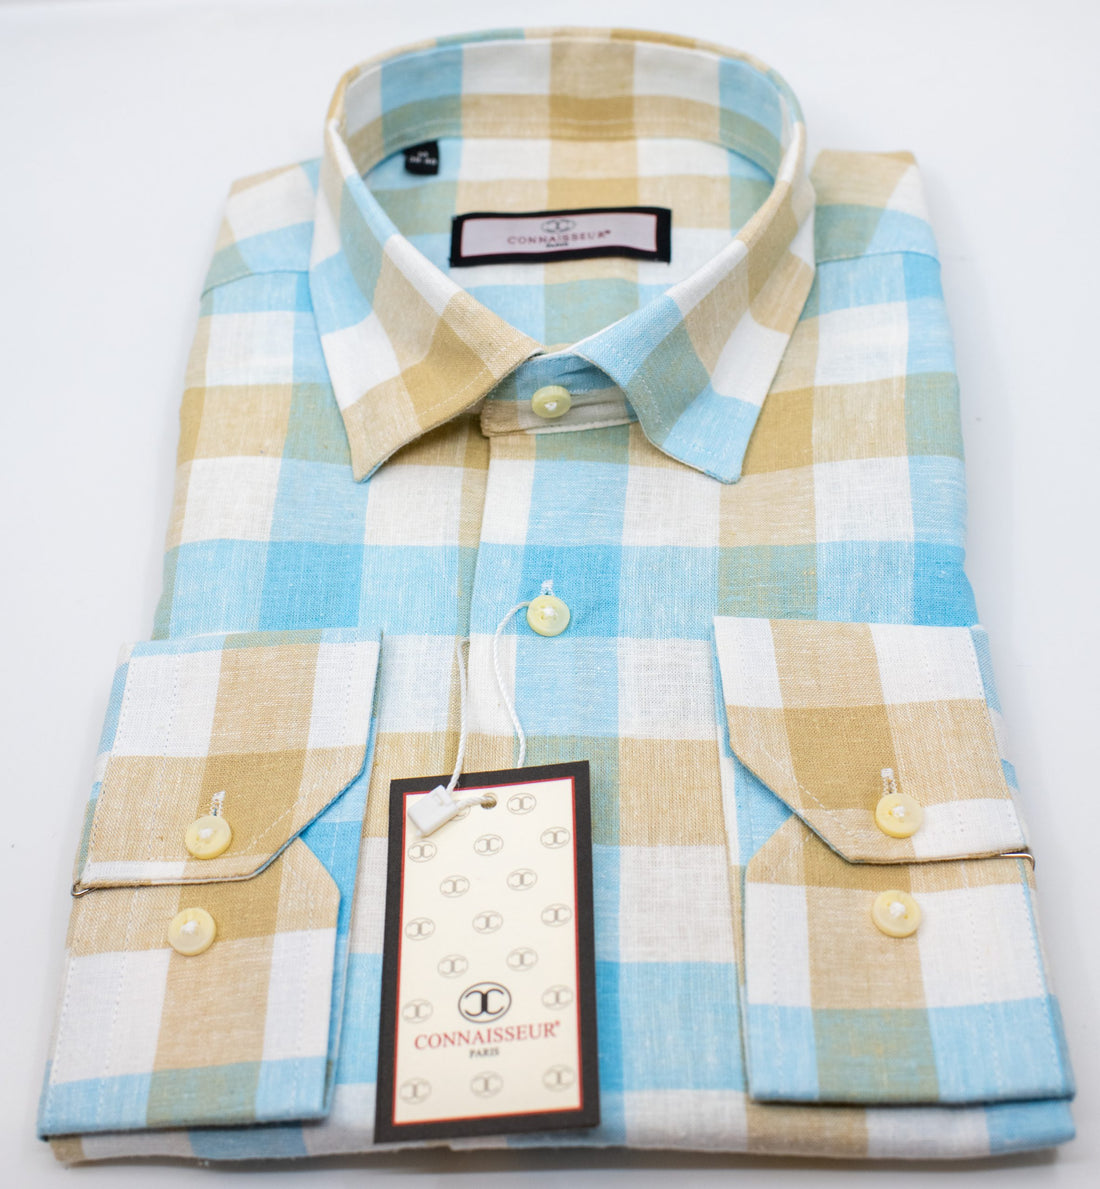 Connaisseur - Brown Turquoise and White Buffalo check linen slim fit dress shirt